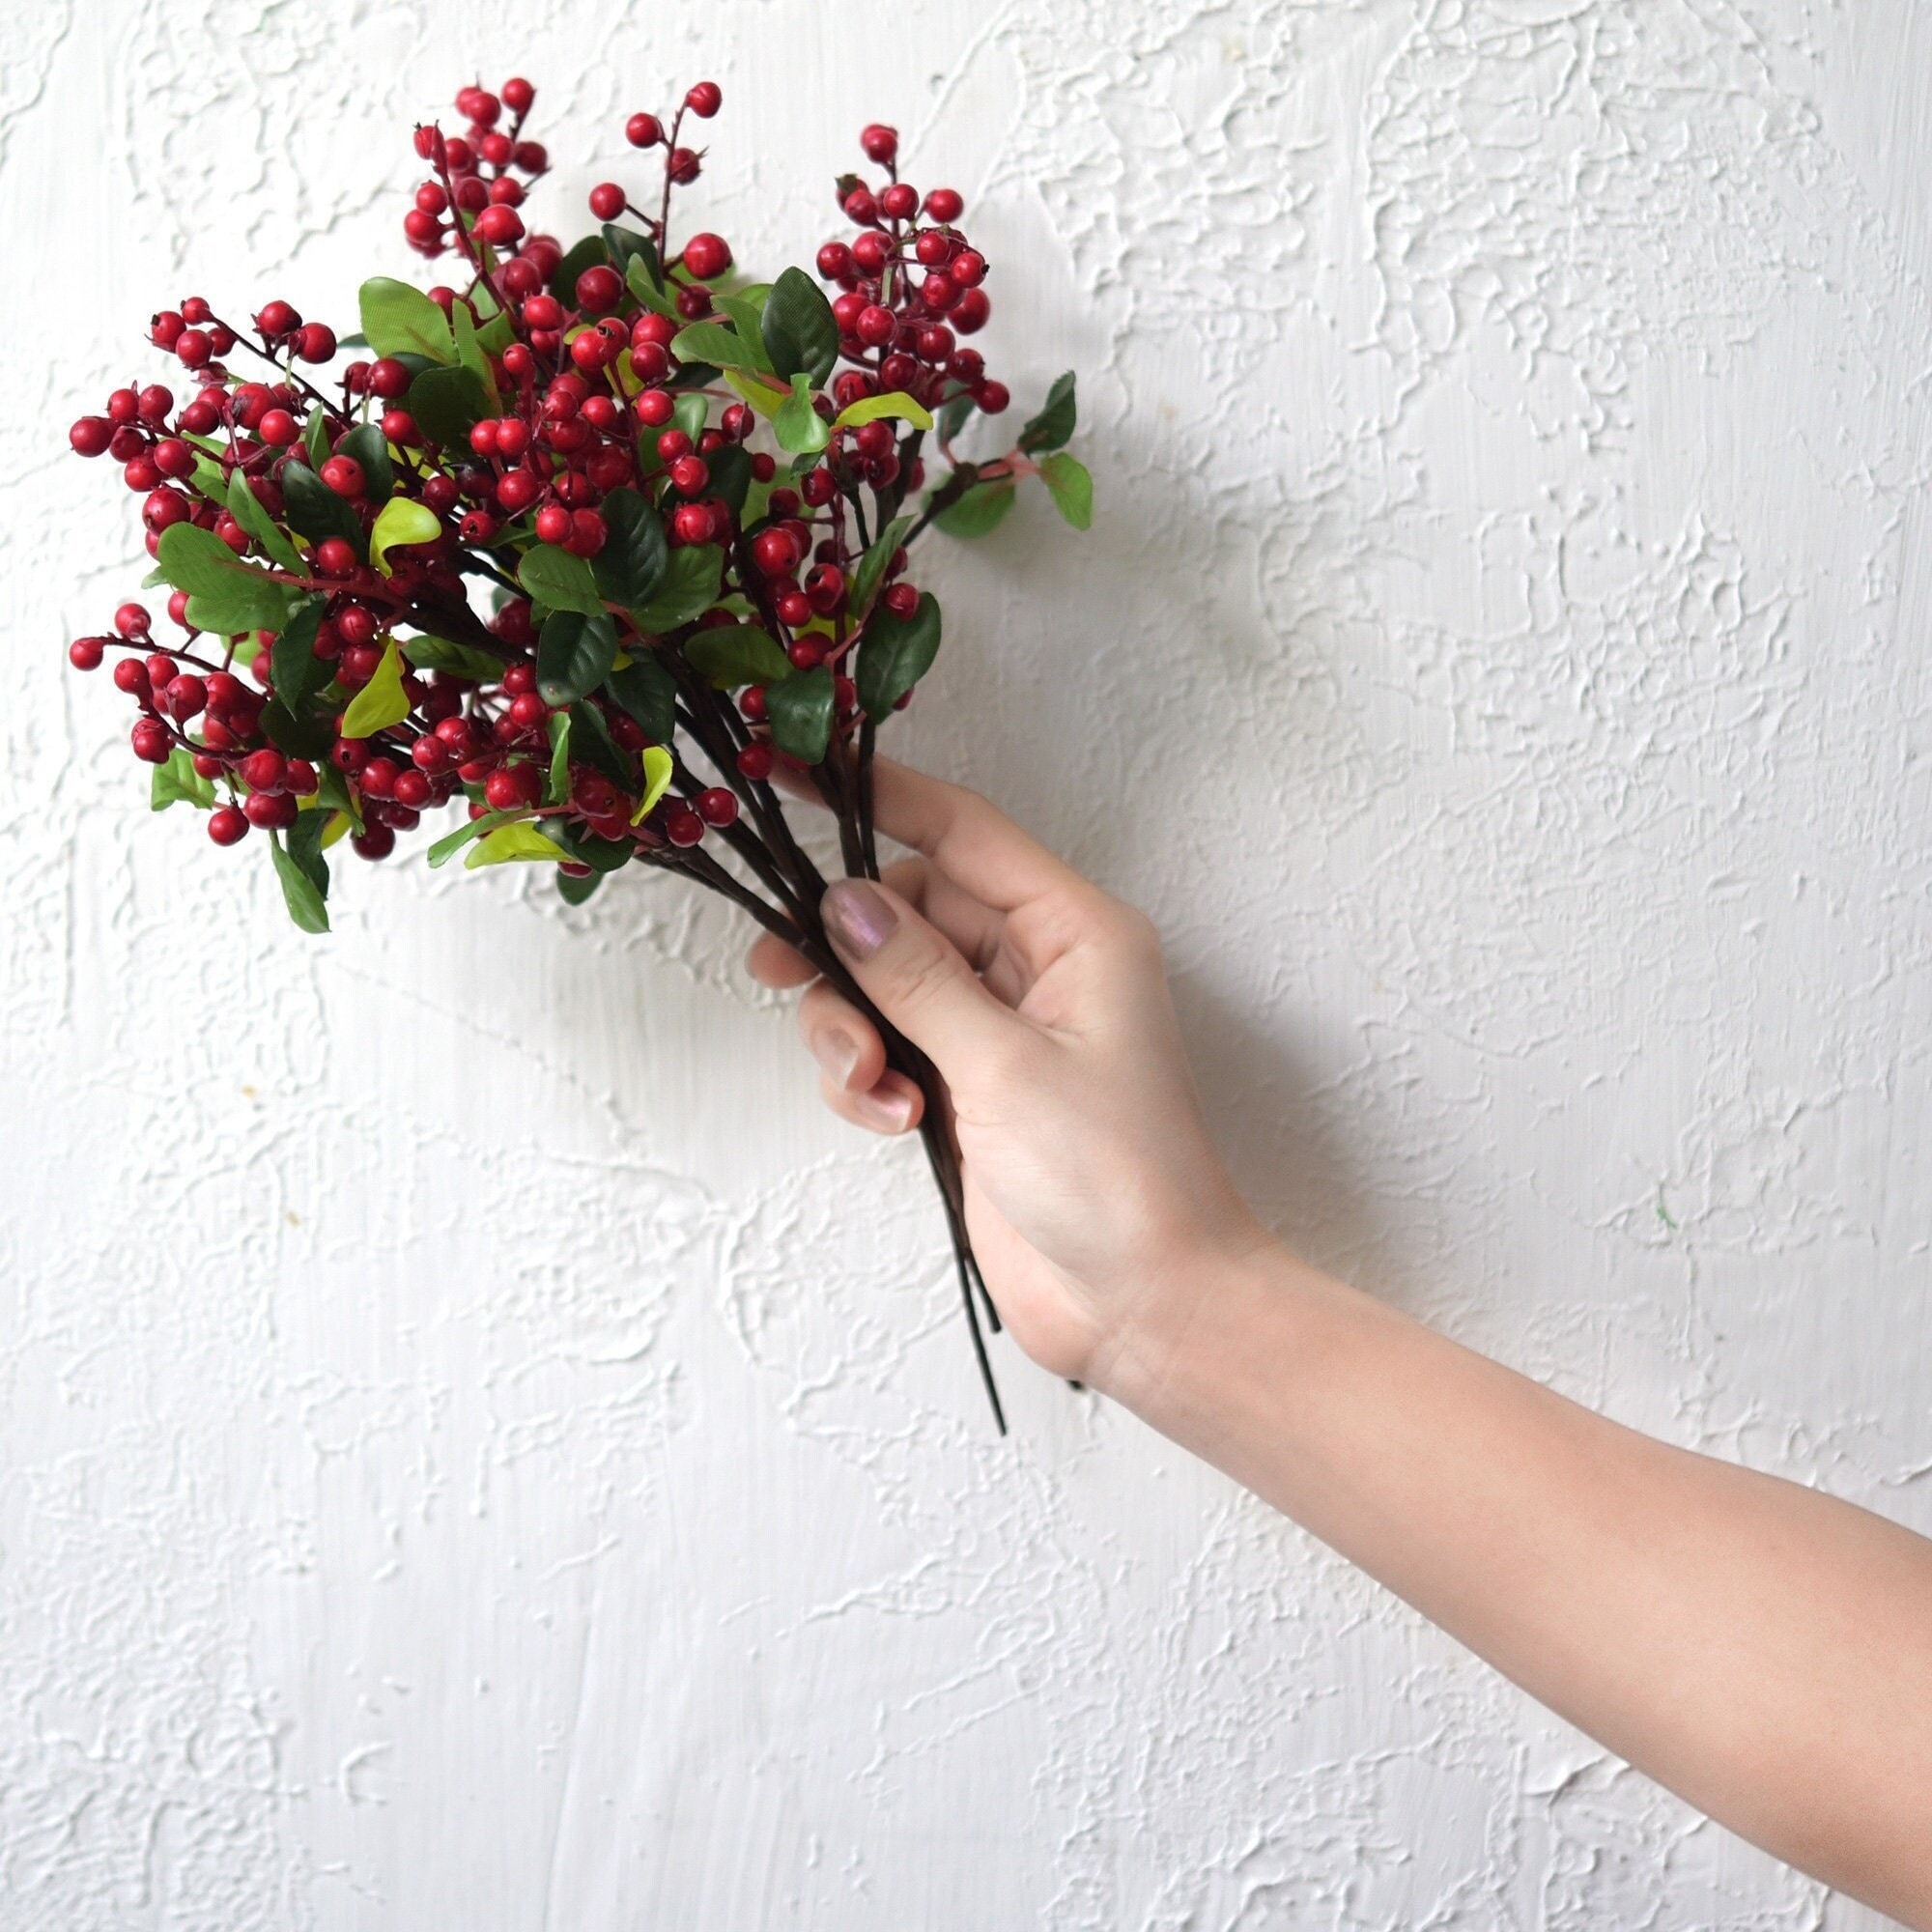 12 Pcs Artificial Mini Christmas Picks Assorted Red Berry Picks Stems Faux  Pine Picks Spray With Pinecones For Christmas Floral Arrangement Winter Hol